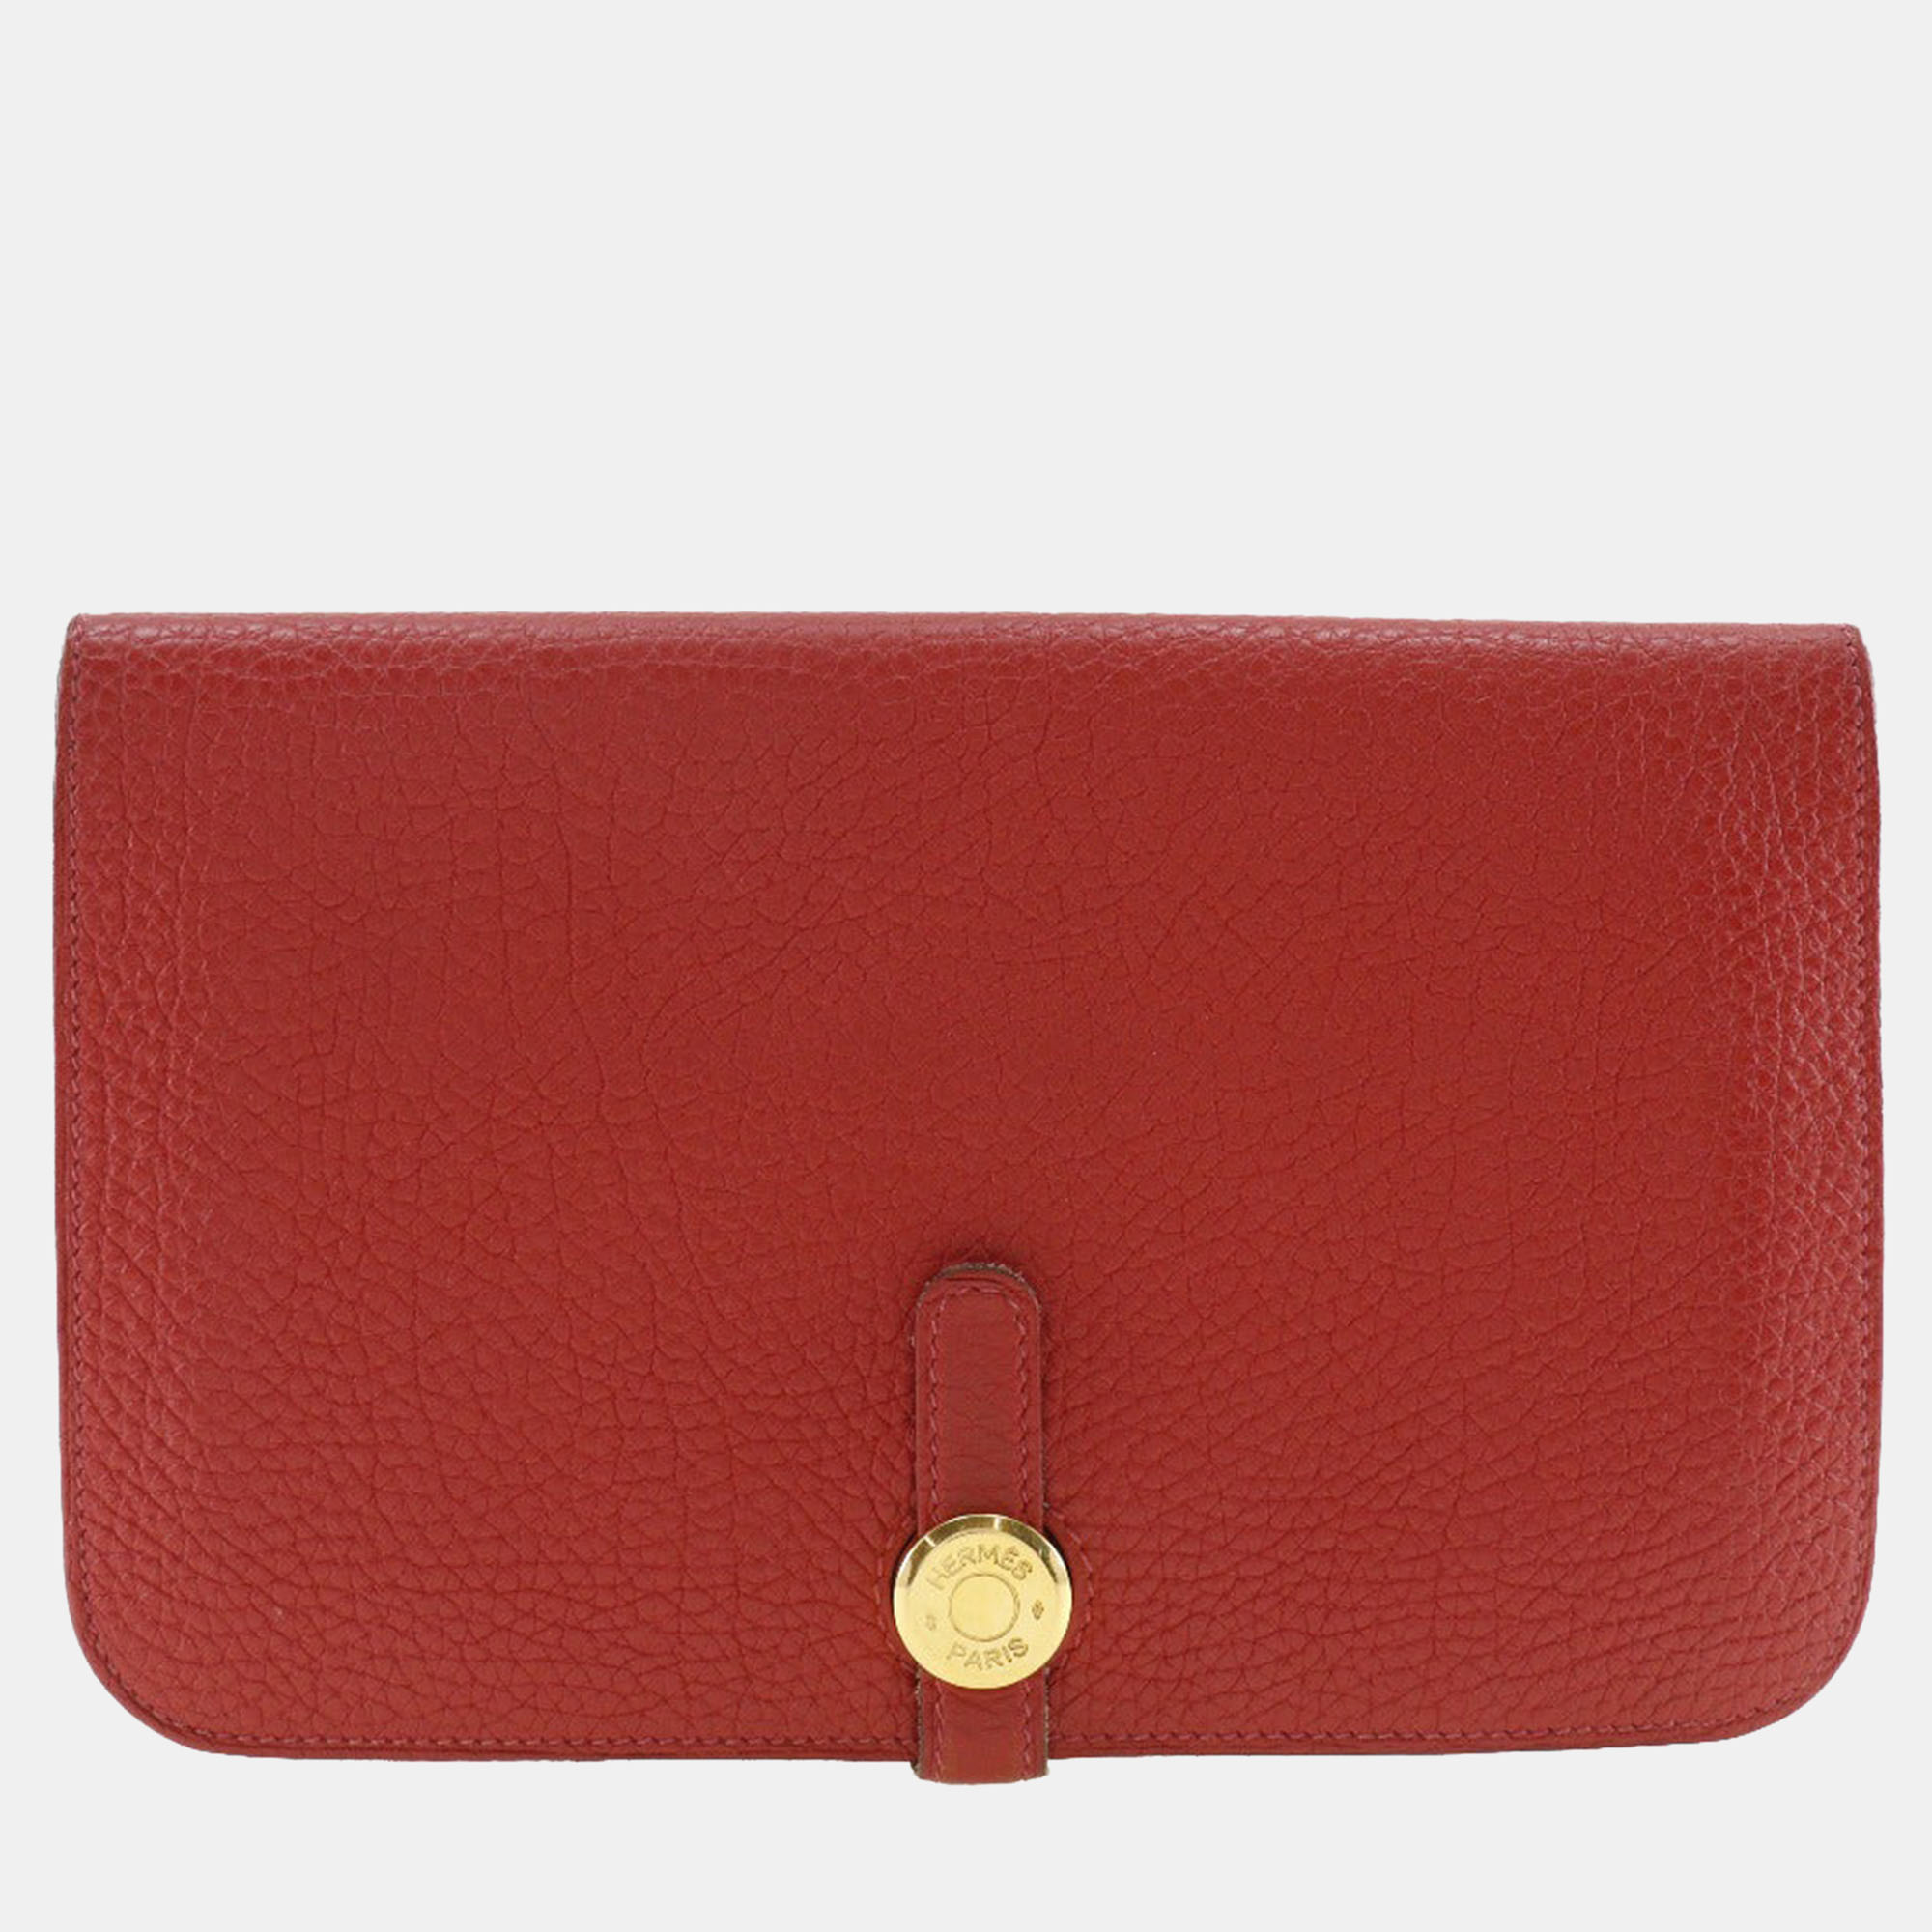 Pre-owned Hermes Red Togo Leather Dogon Wallet